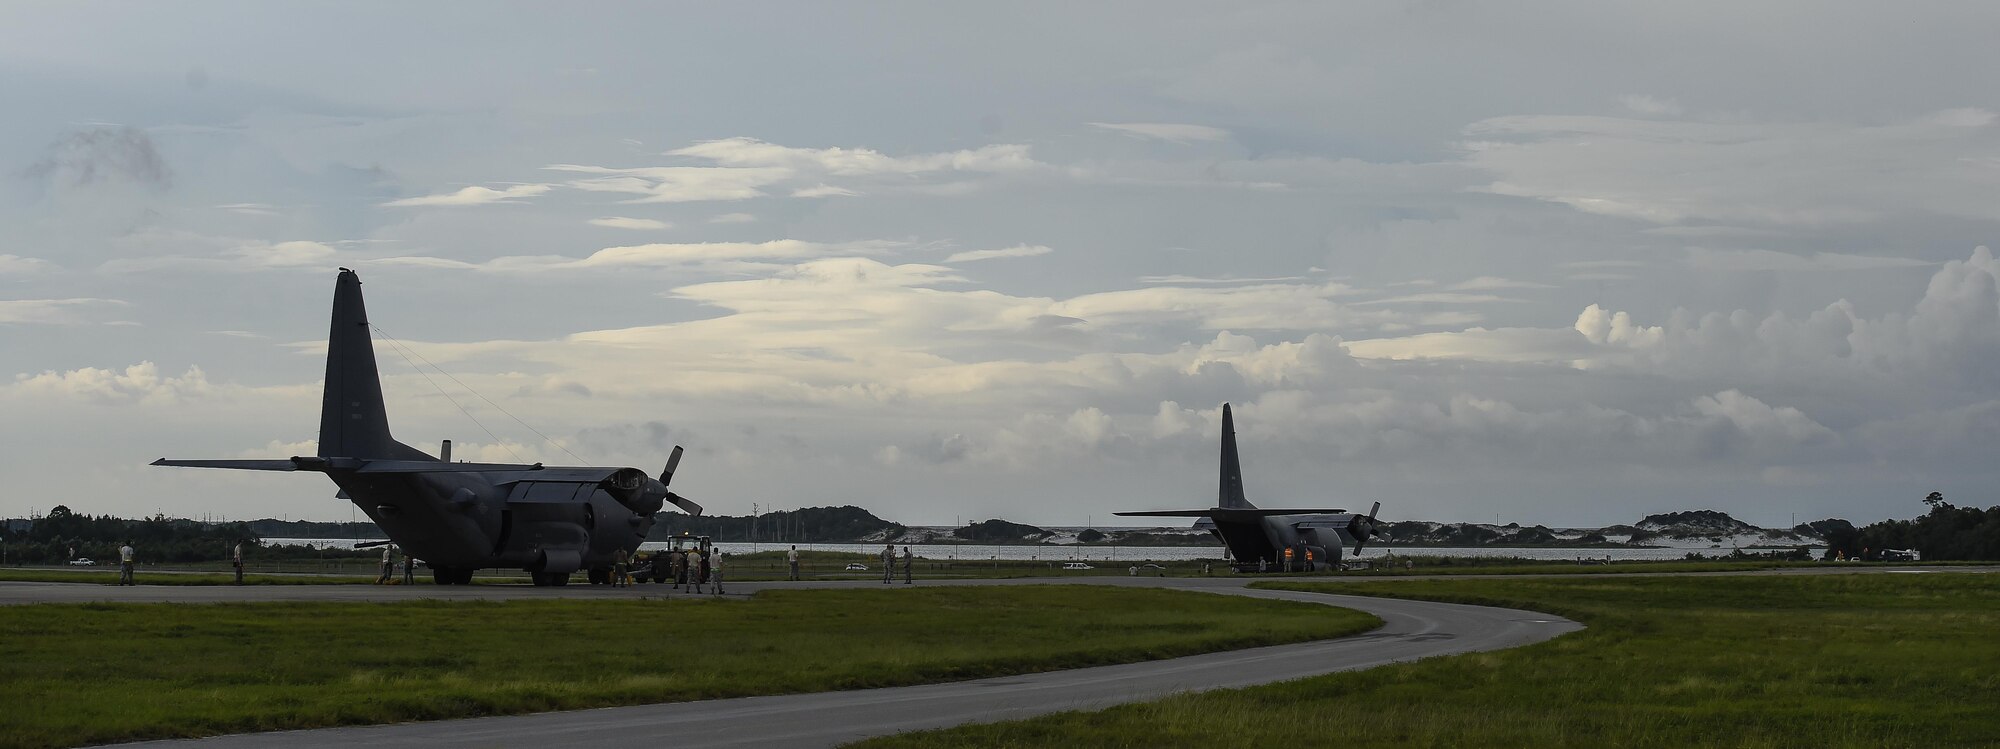 Airmen tow an AC-130H Spectre, left, and an MC-130P Combat Shadow, right, from the flightline to the Air Park on Hurlburt Field, Fla., August 15, 2015. More than 40 personnel with eight base organizations were on site during the tow process. The AC-130H Spectre will be displayed at the North end of the Air Park and the MC-130P Combat Shadow will be displayed at the South end of the Air Park. (U.S. Air Force photo by Airman Kai White/Released)